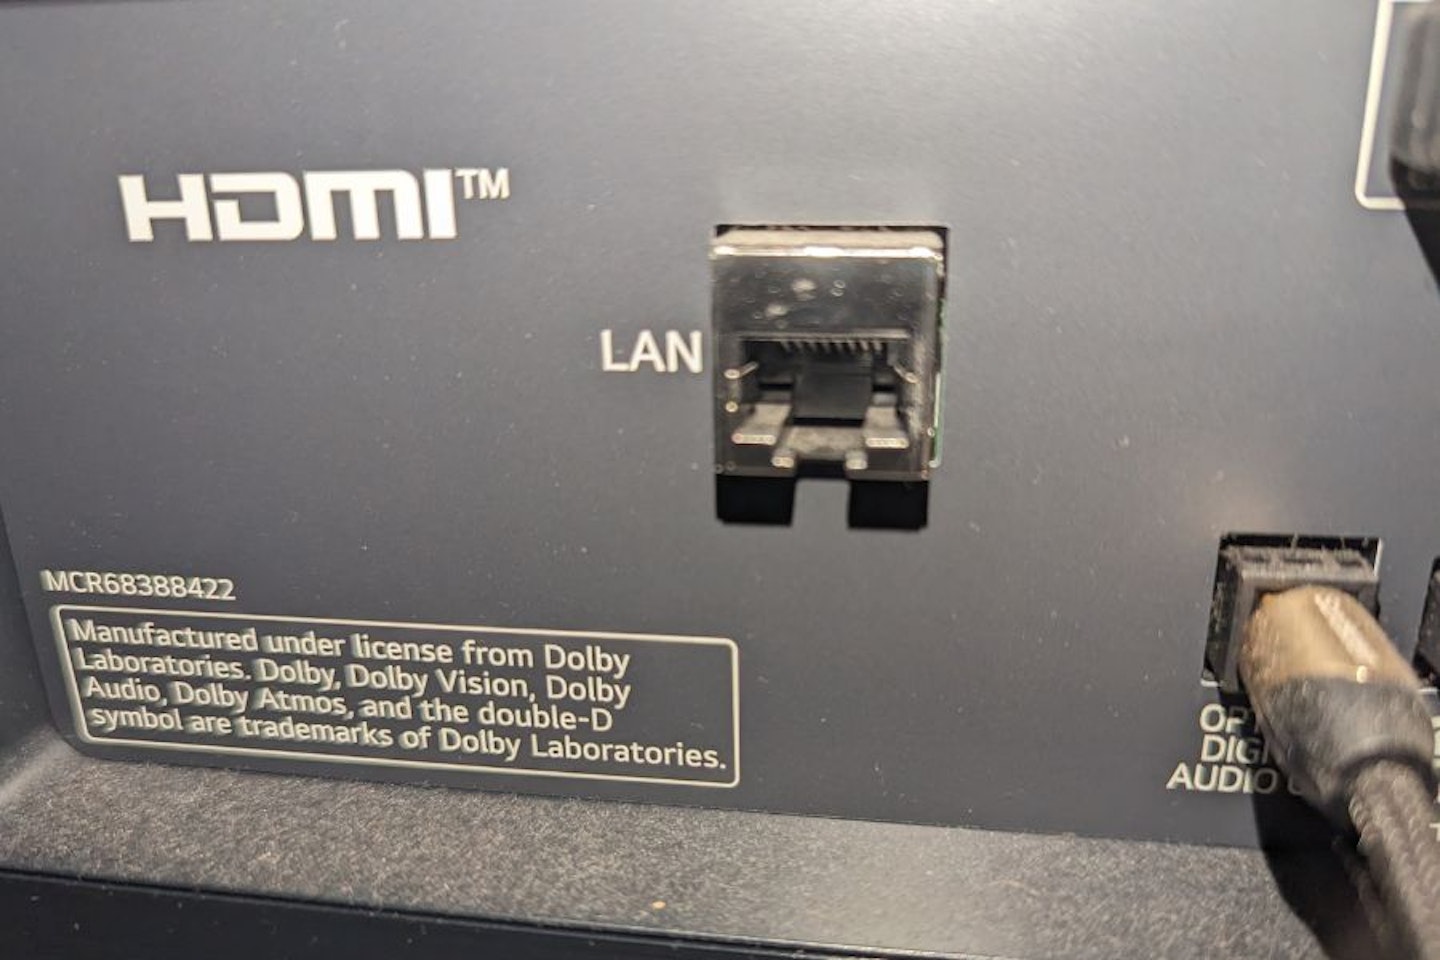 How do I connect my TV to the internet?